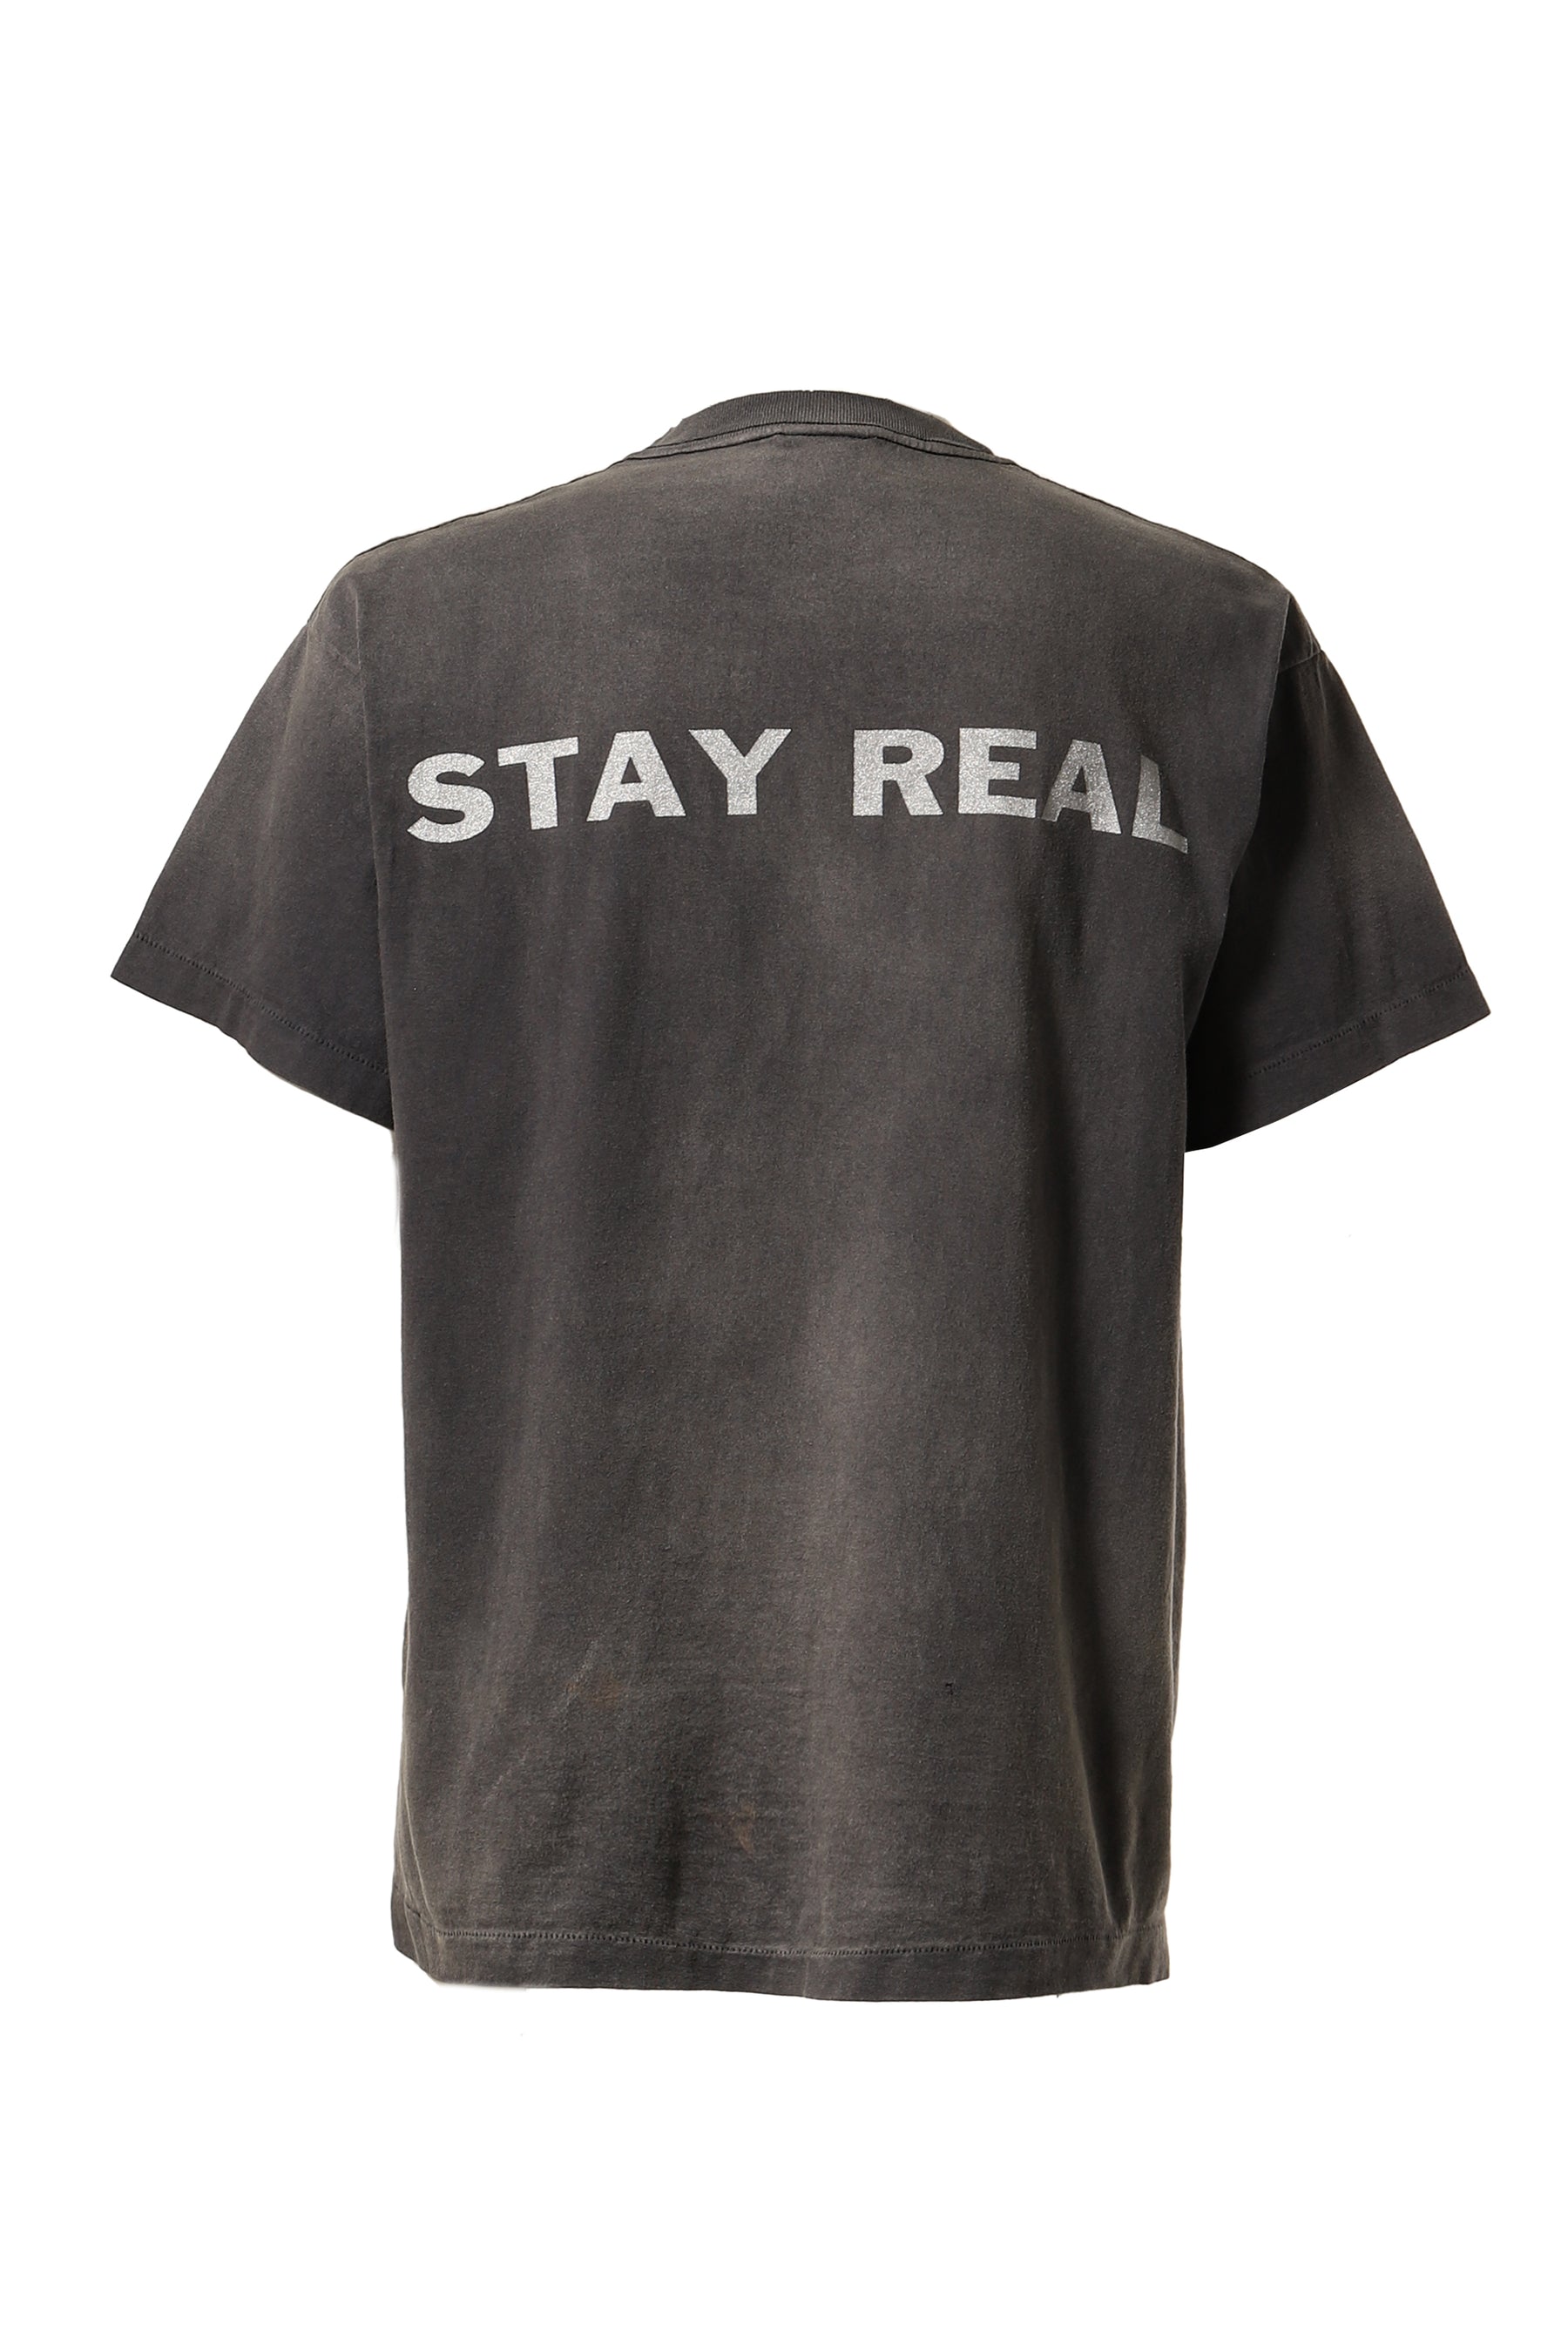 SAINT Mxxxxxx × Pay money To my Pain SS24 PTP_SS TEE/STAY REAL ...